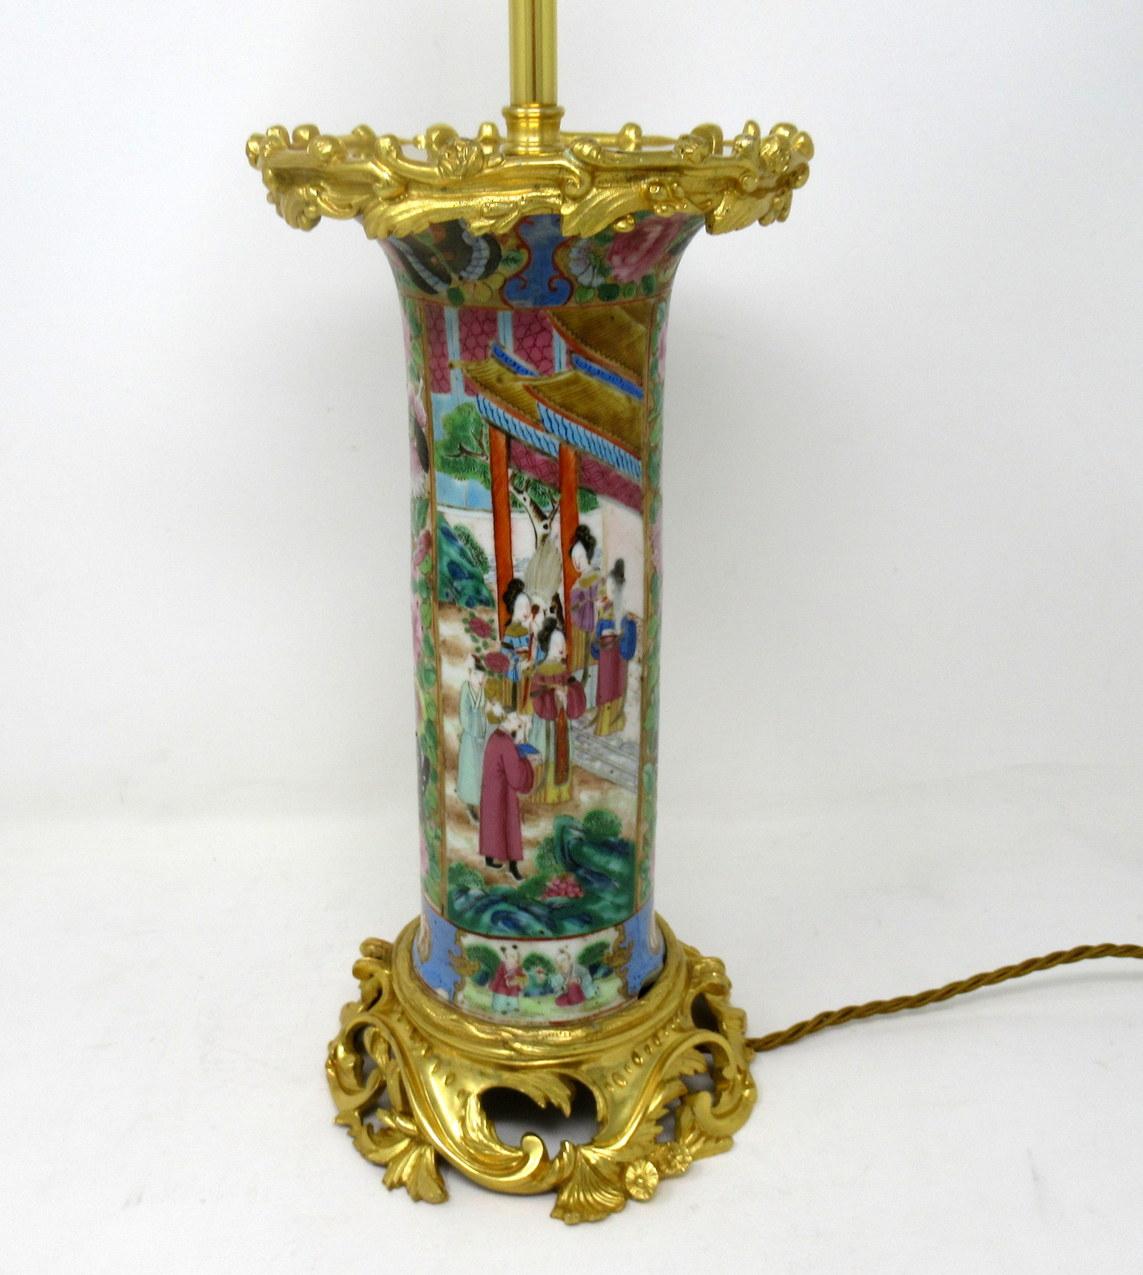 An exceptionally fine example of a Cantonese hand decorated in colors Chinese export porcelain tall cylindrical vase no converted to an electric table lamp of good size proportions, with its original highly ornate mounts and lavish cast rococo style